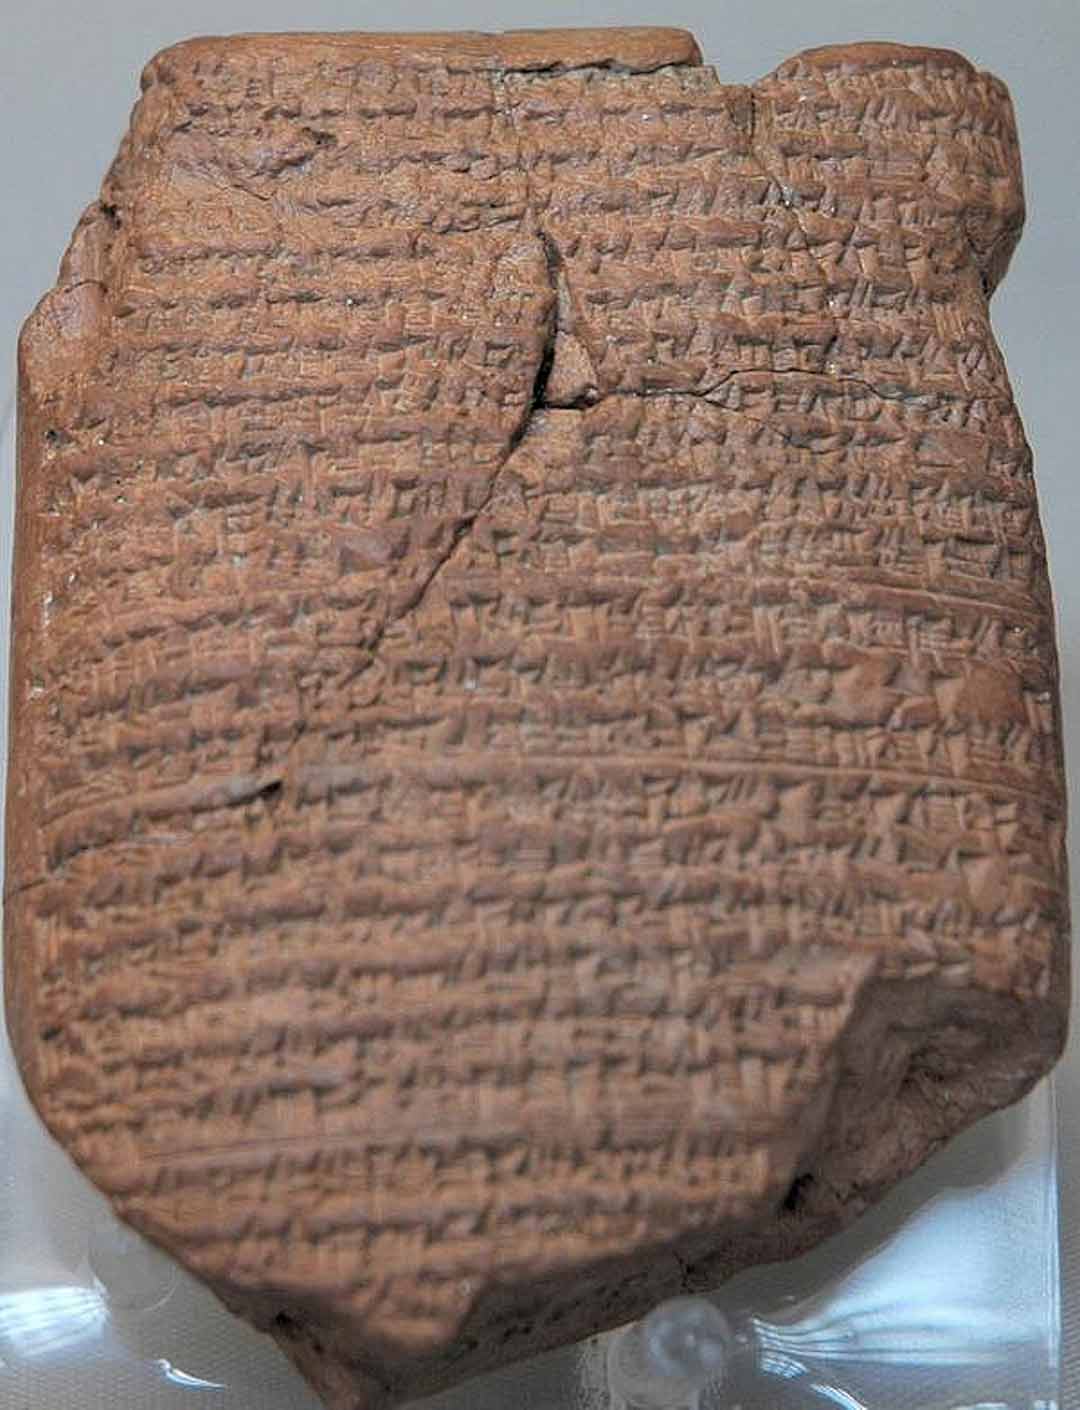 Chronicle Concerning the Early Years of Nebuchadnezzar II (ca. 590 BCE)